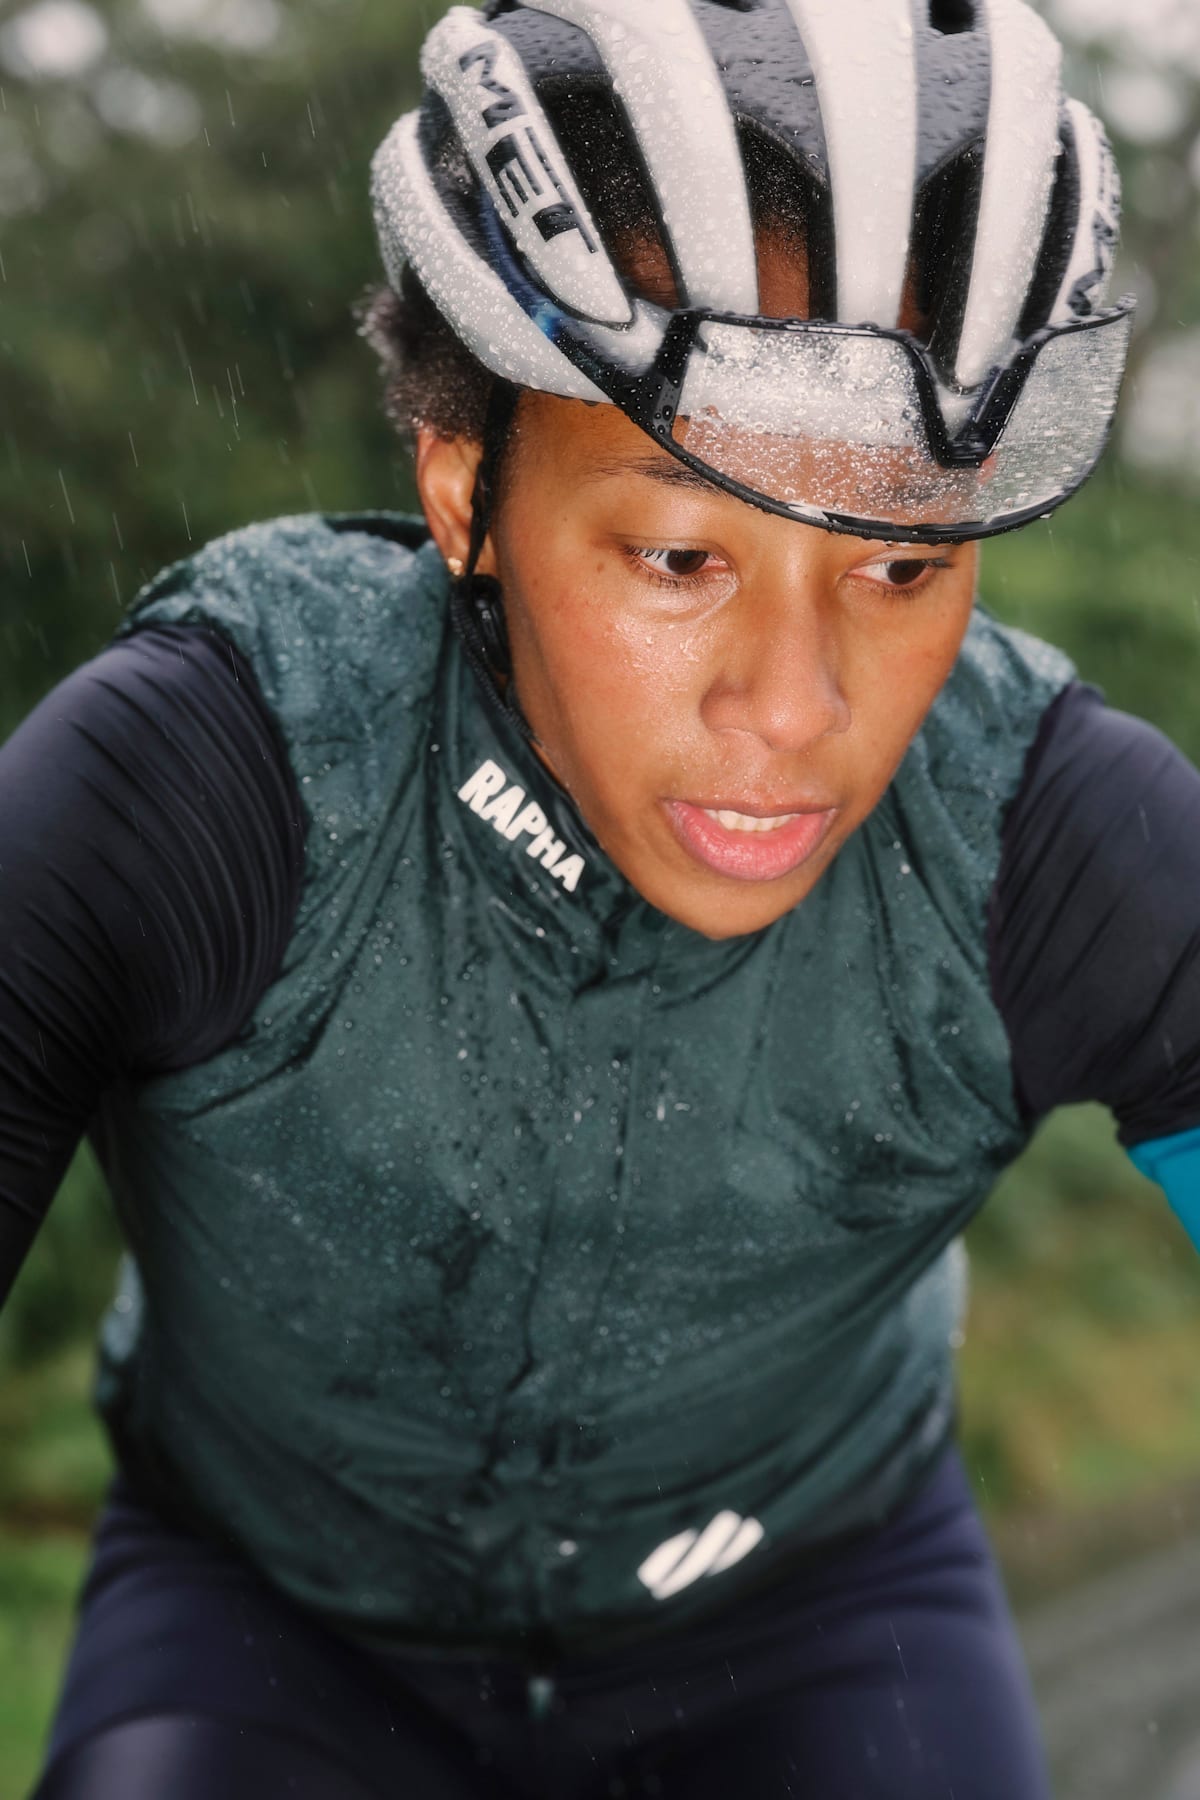 Cycling Jerseys for Wet Weather